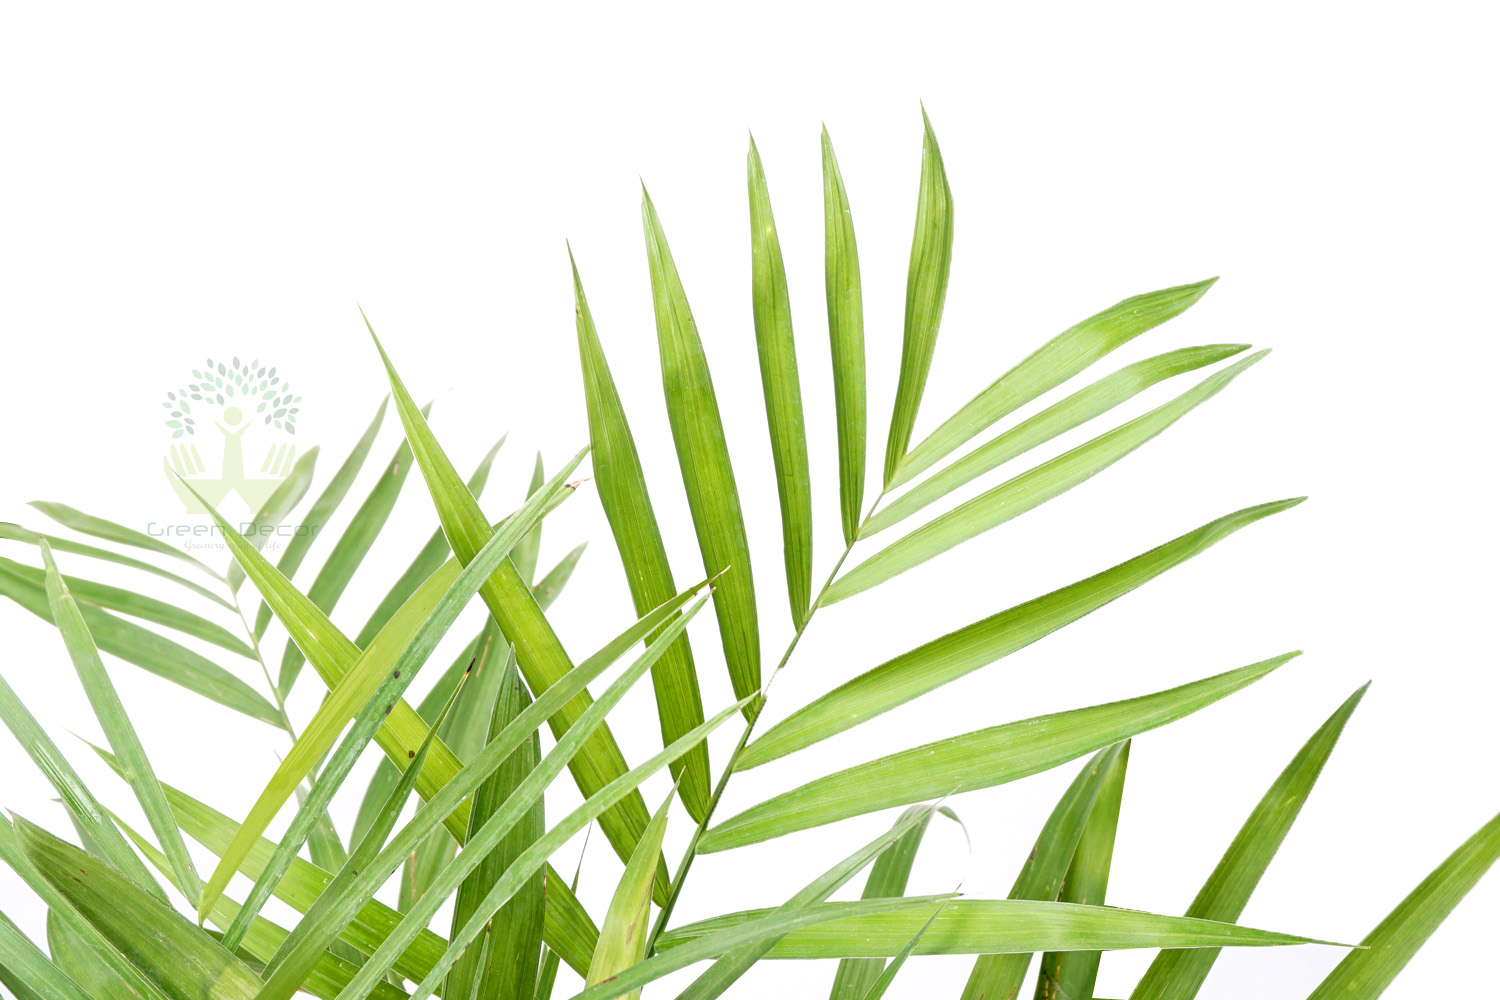 Buy Bamboo Palm Plants Leaves View , White Pots and seeds in Delhi NCR by the best online nursery shop Greendecor.